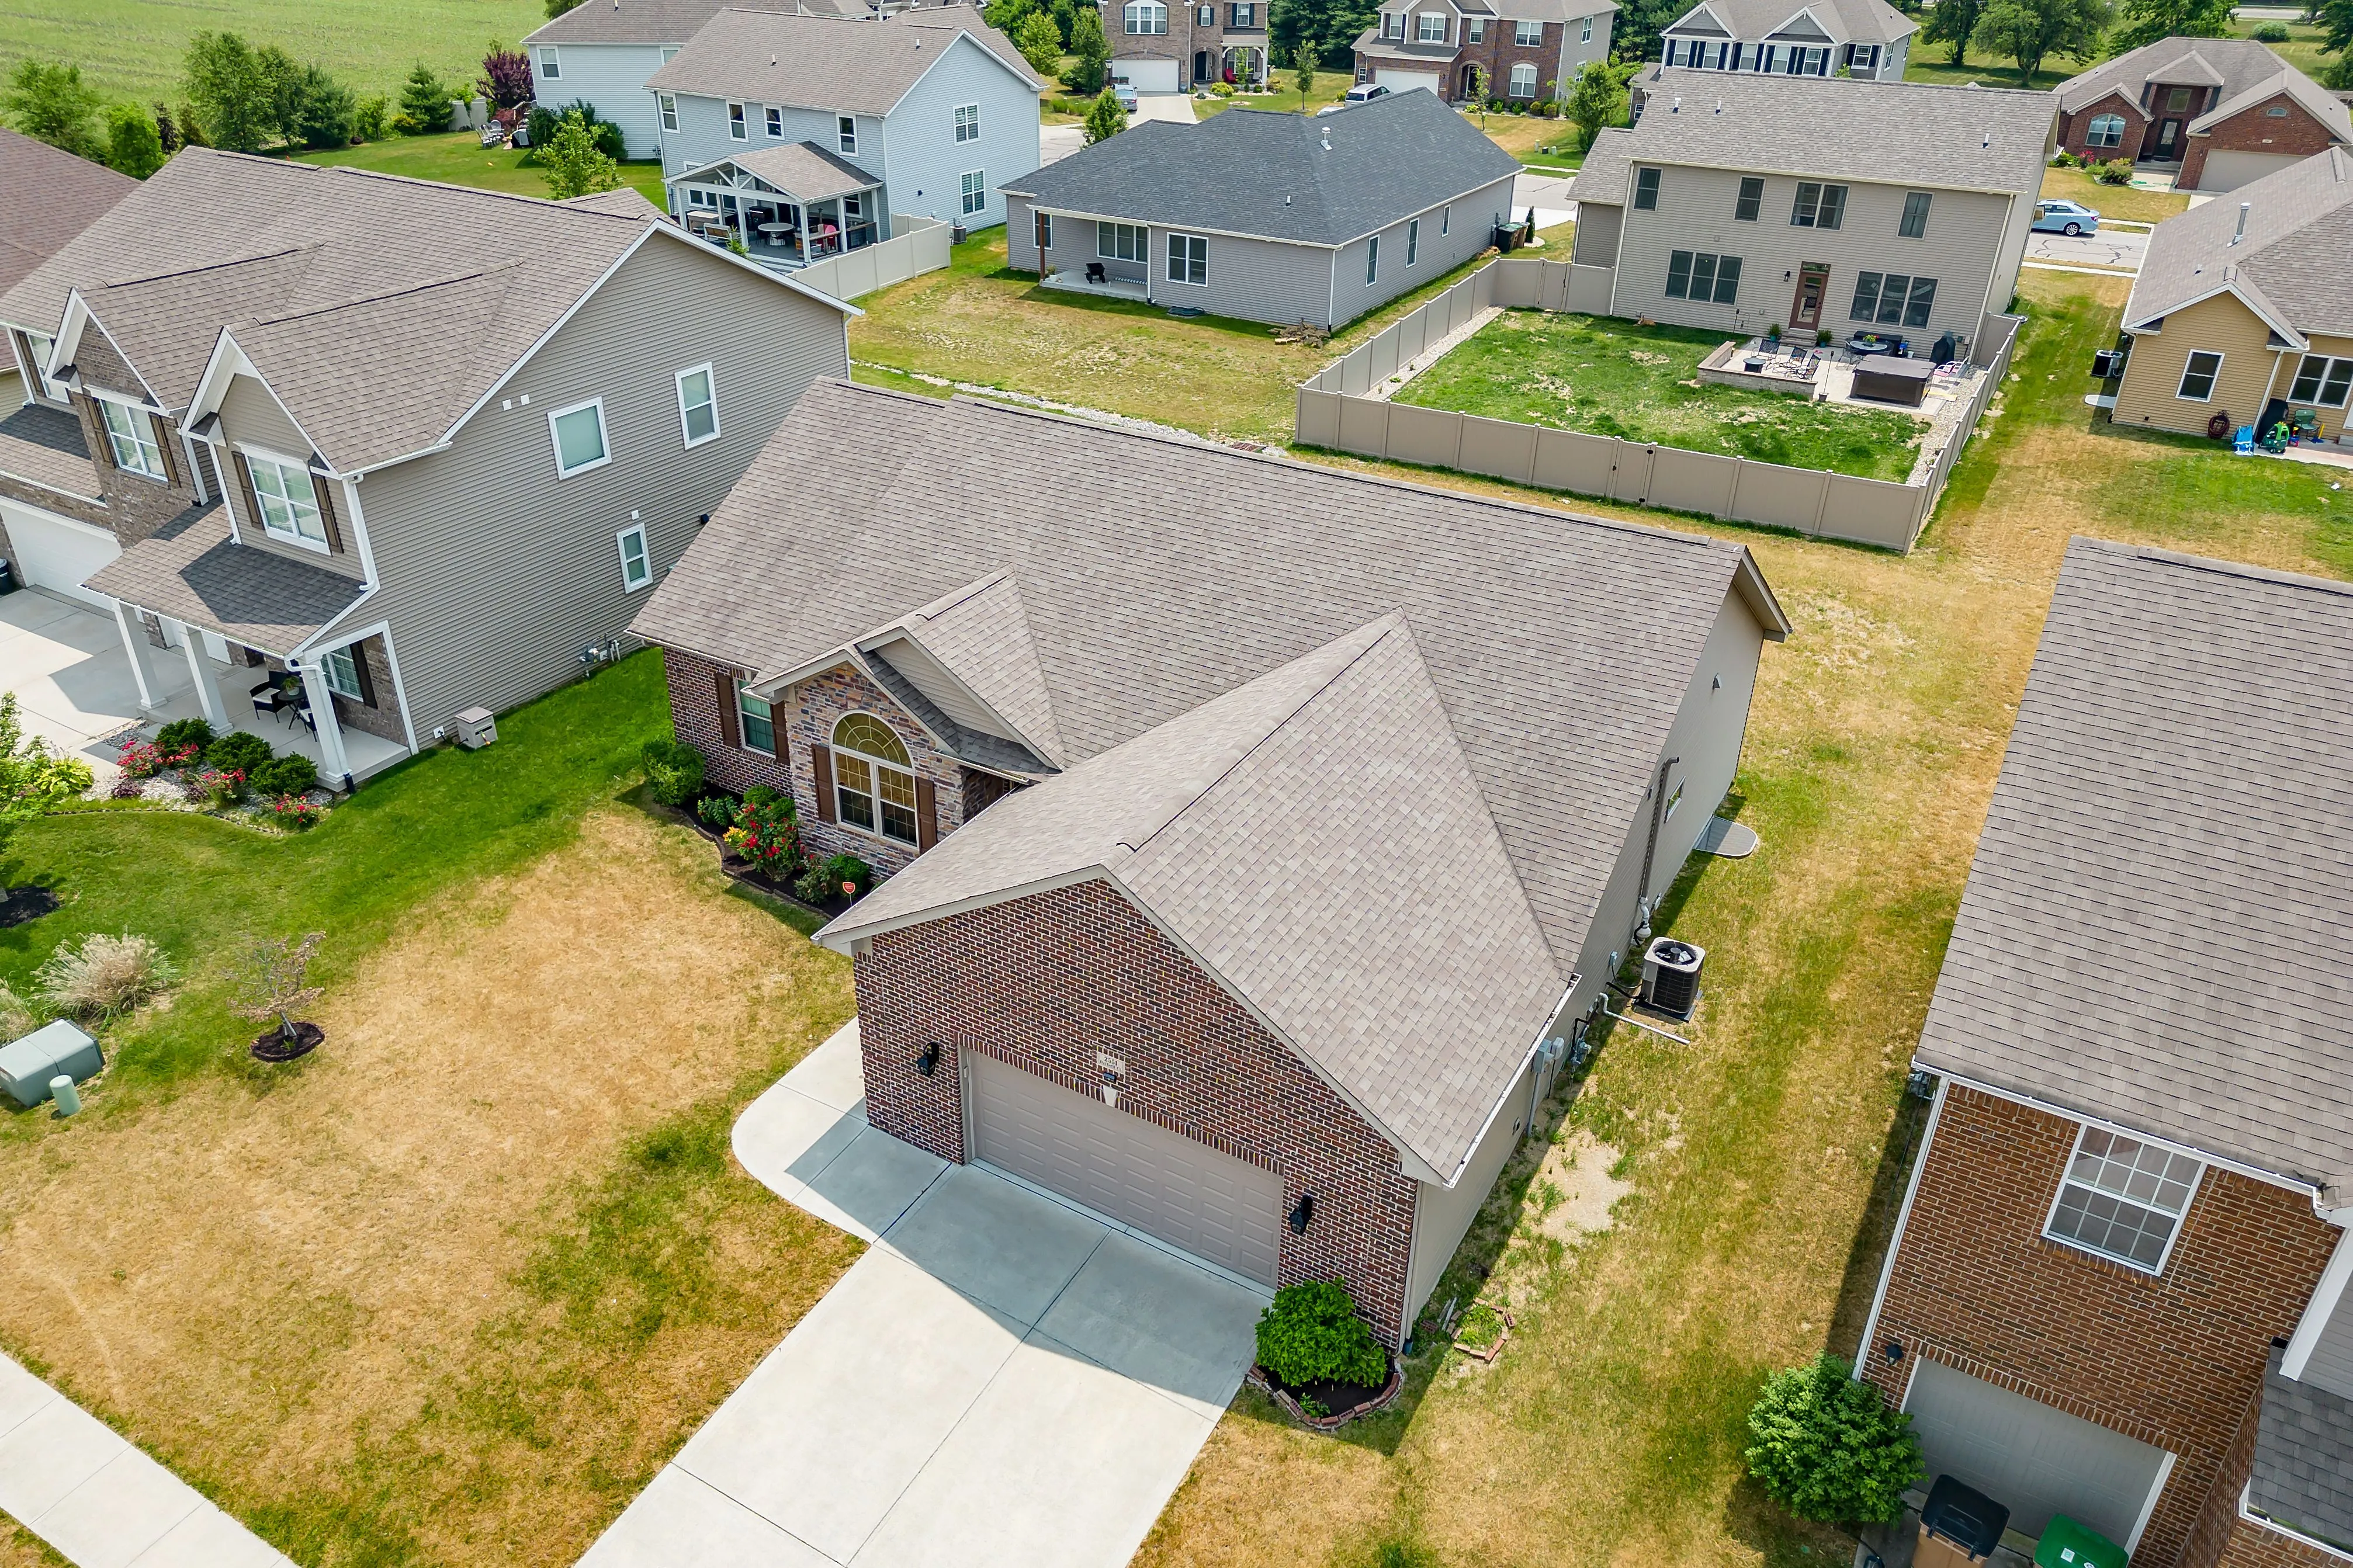 Aerial view of a suburban neighborhood with houses and green lawns.